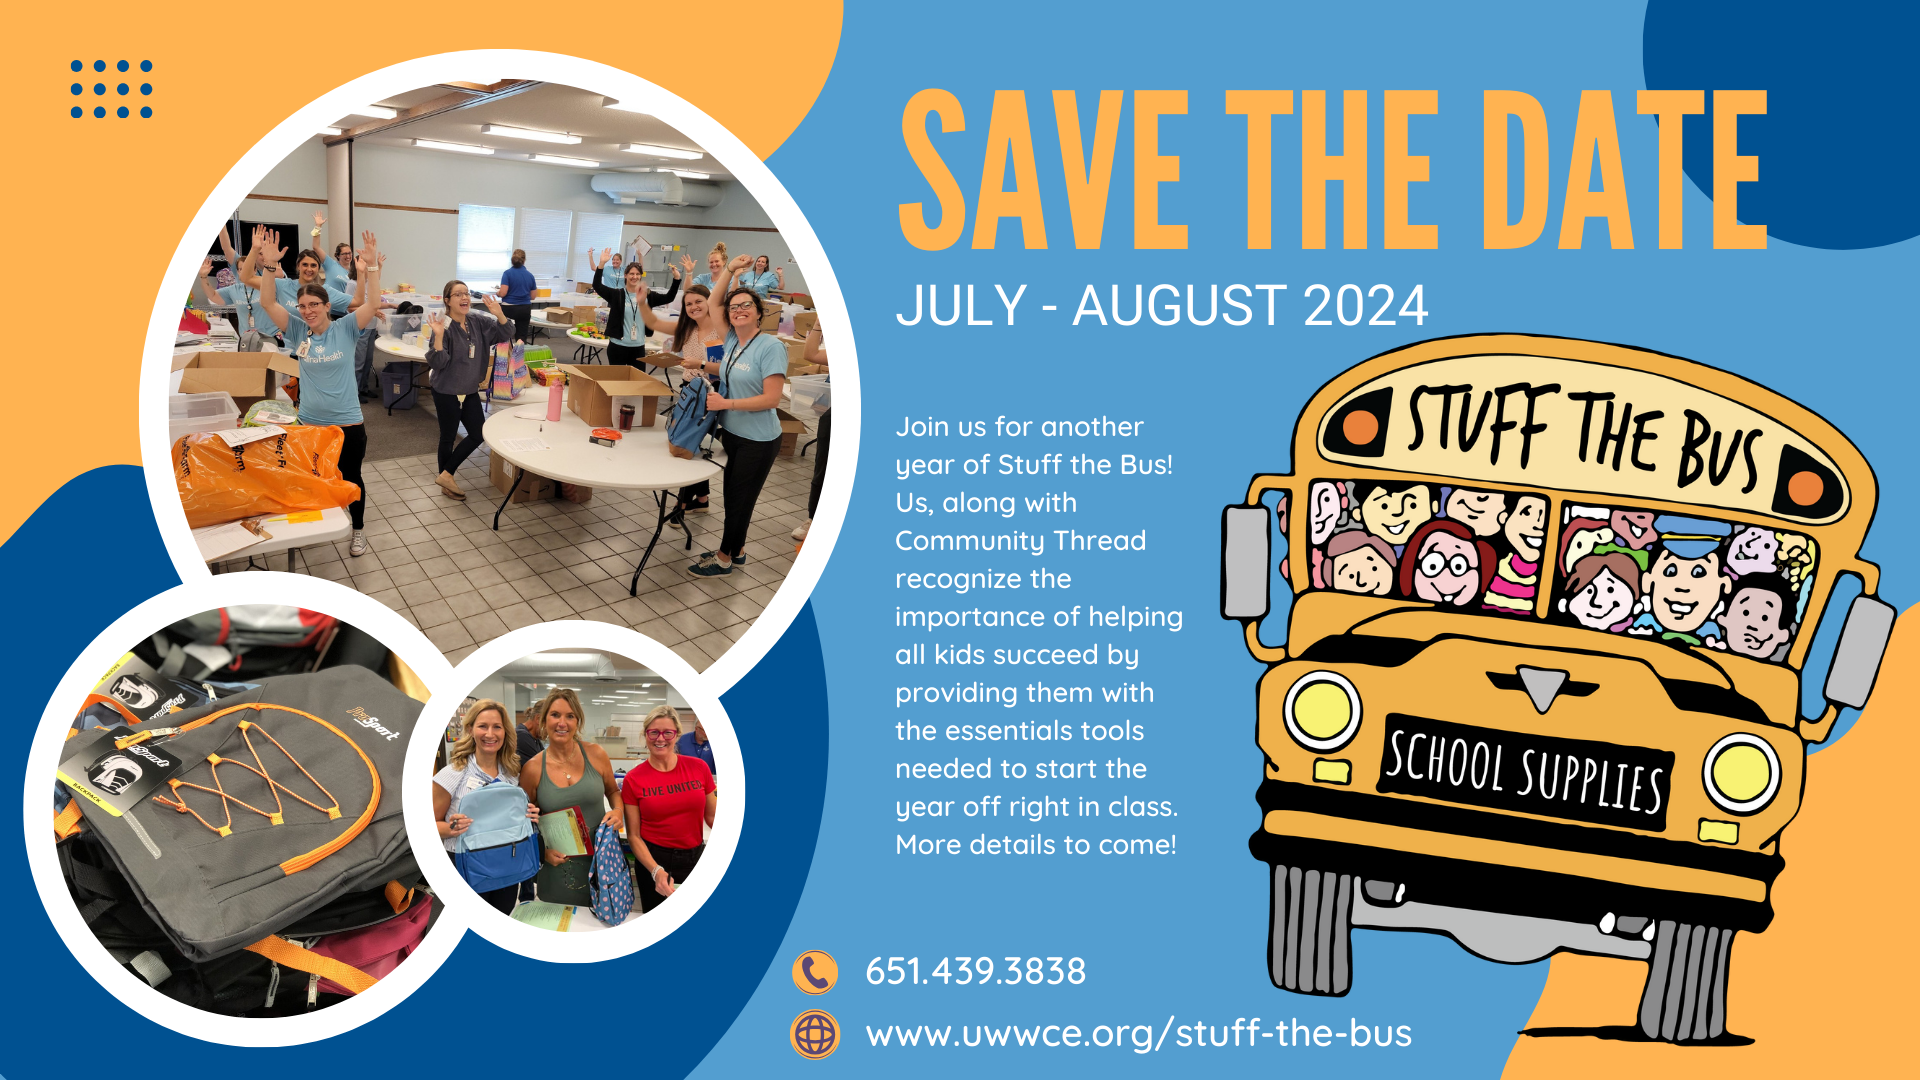 Stuff the Bus save the date